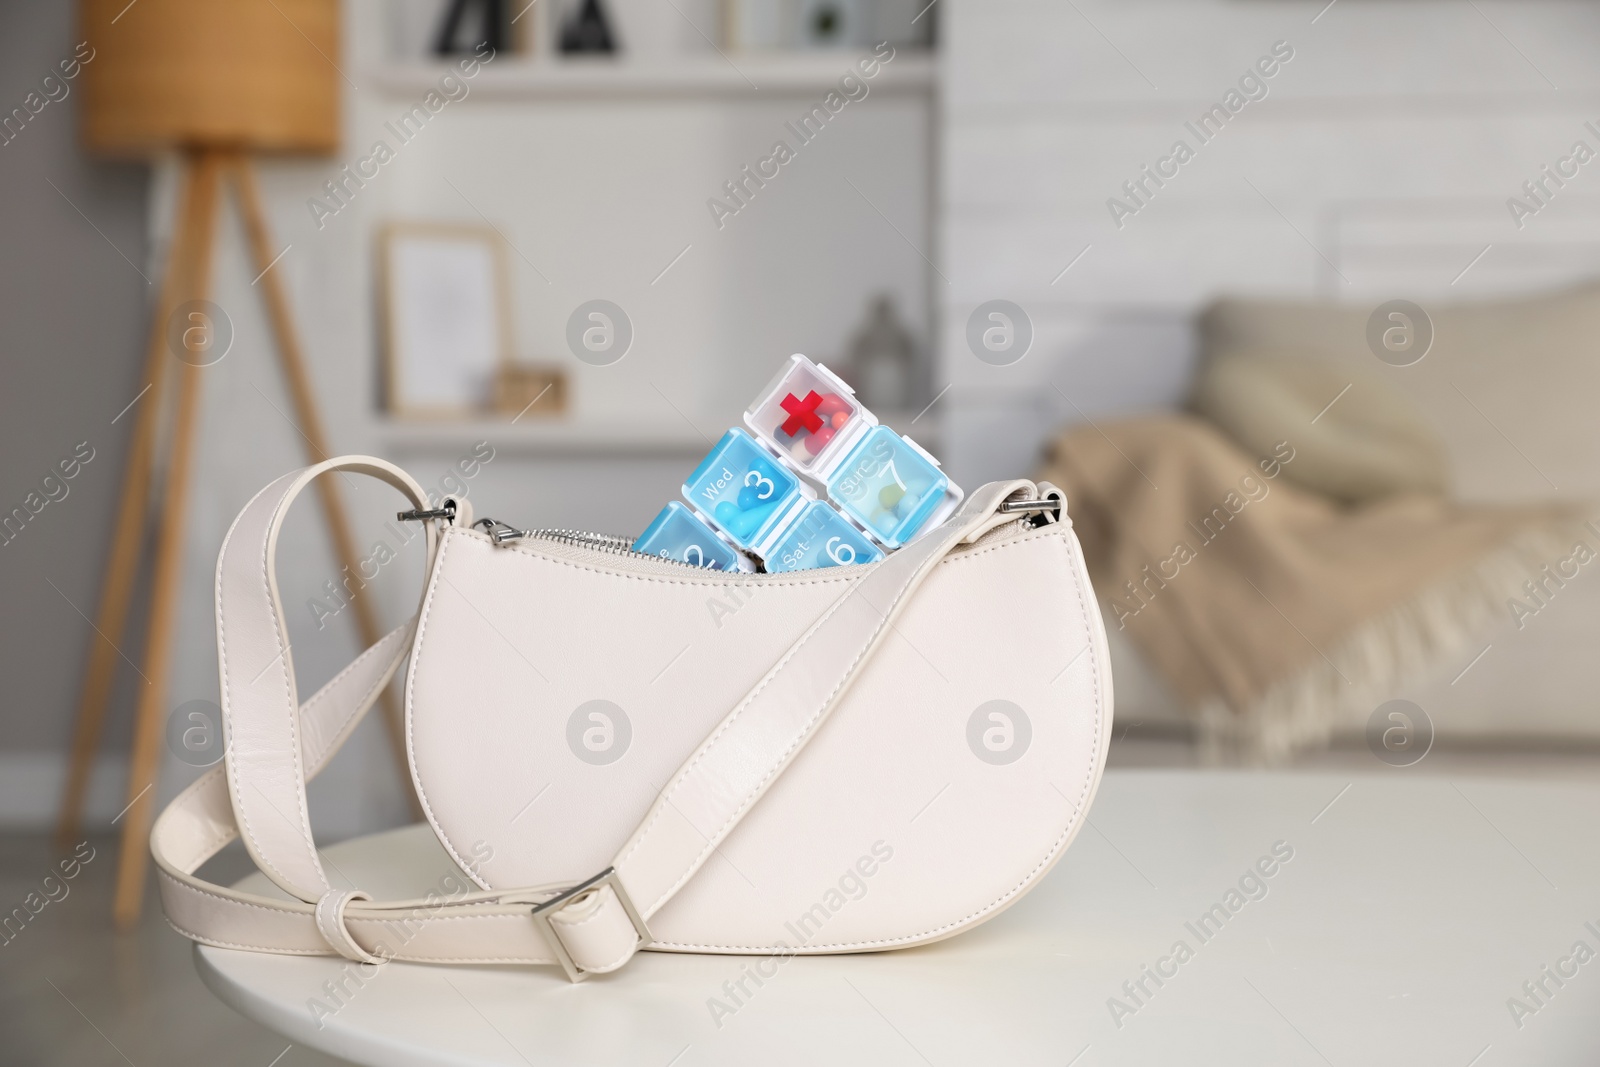 Photo of Stylish women's bag with plastic pill box on white table in room. Space for text